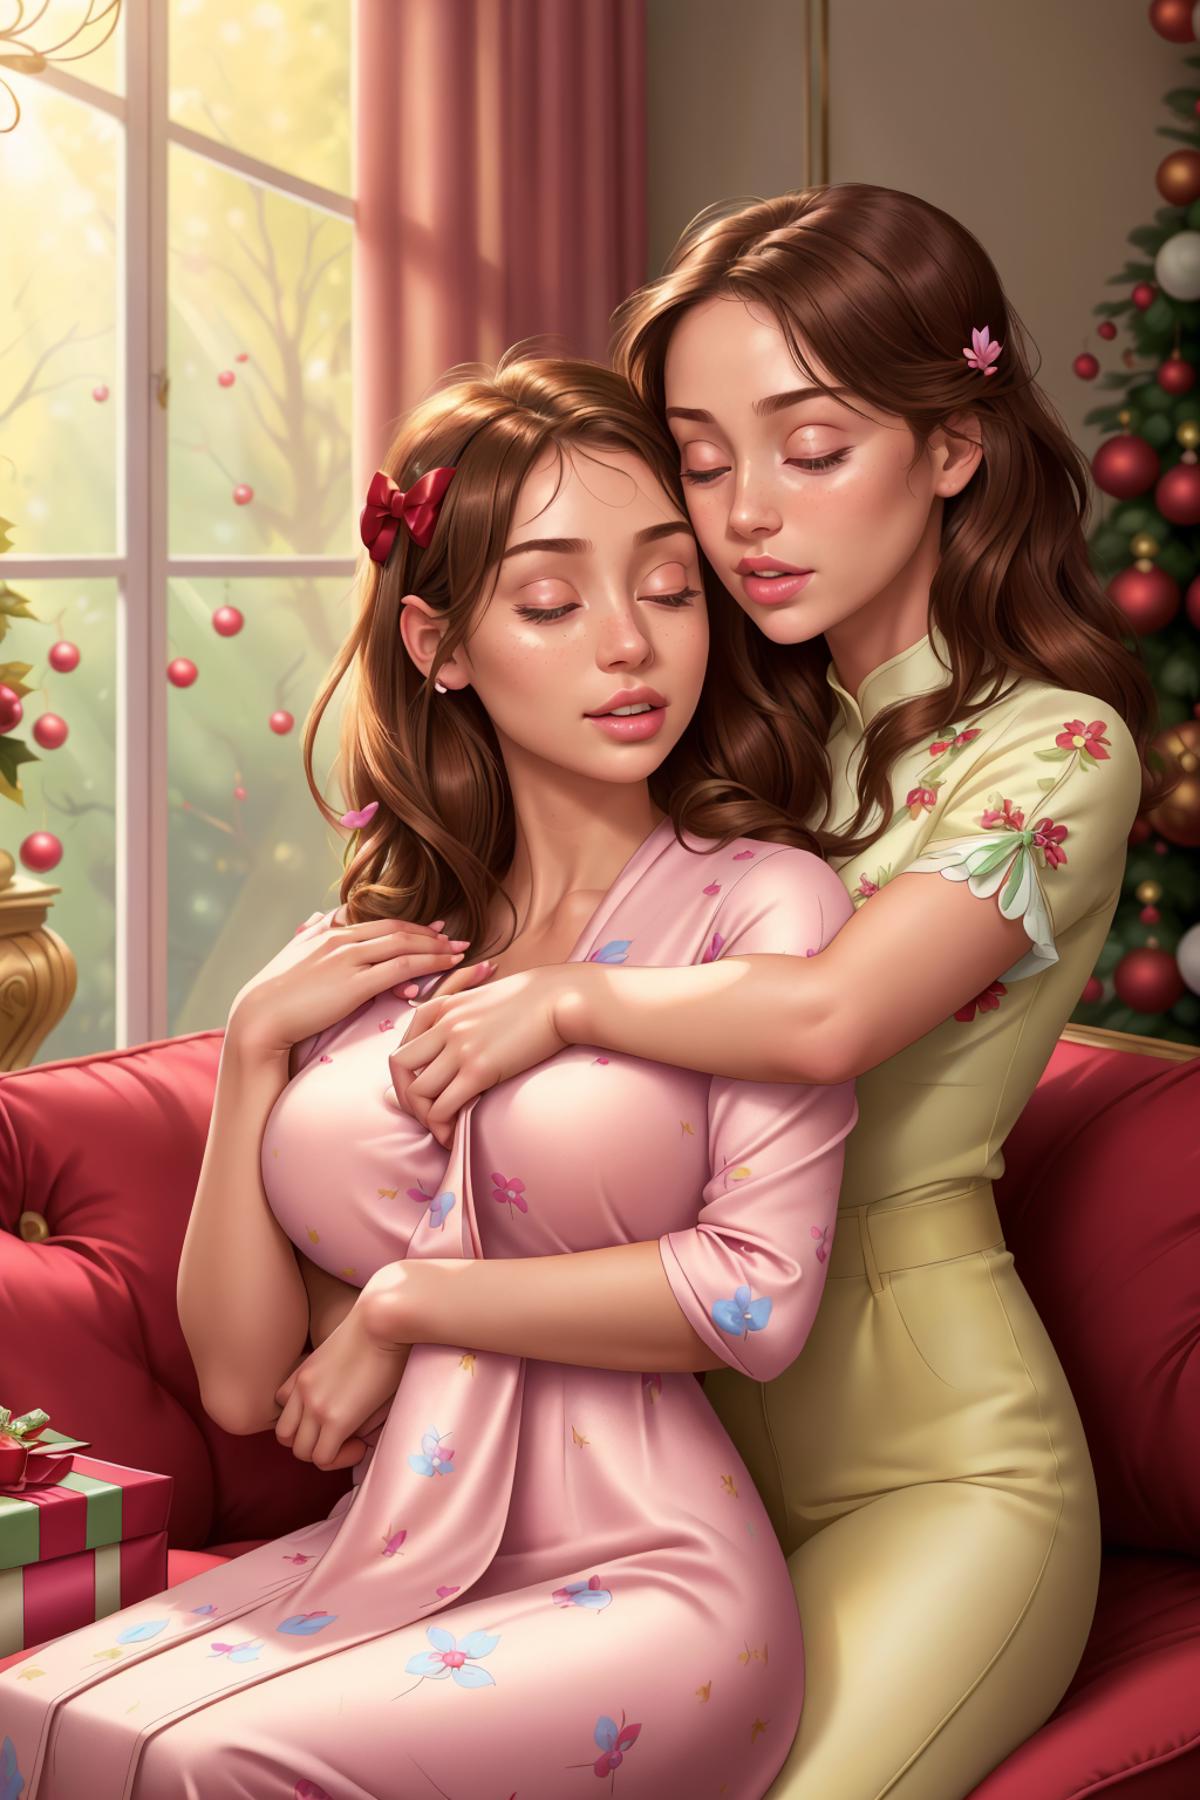 Two women in pajamas hugging in front of a Christmas tree.